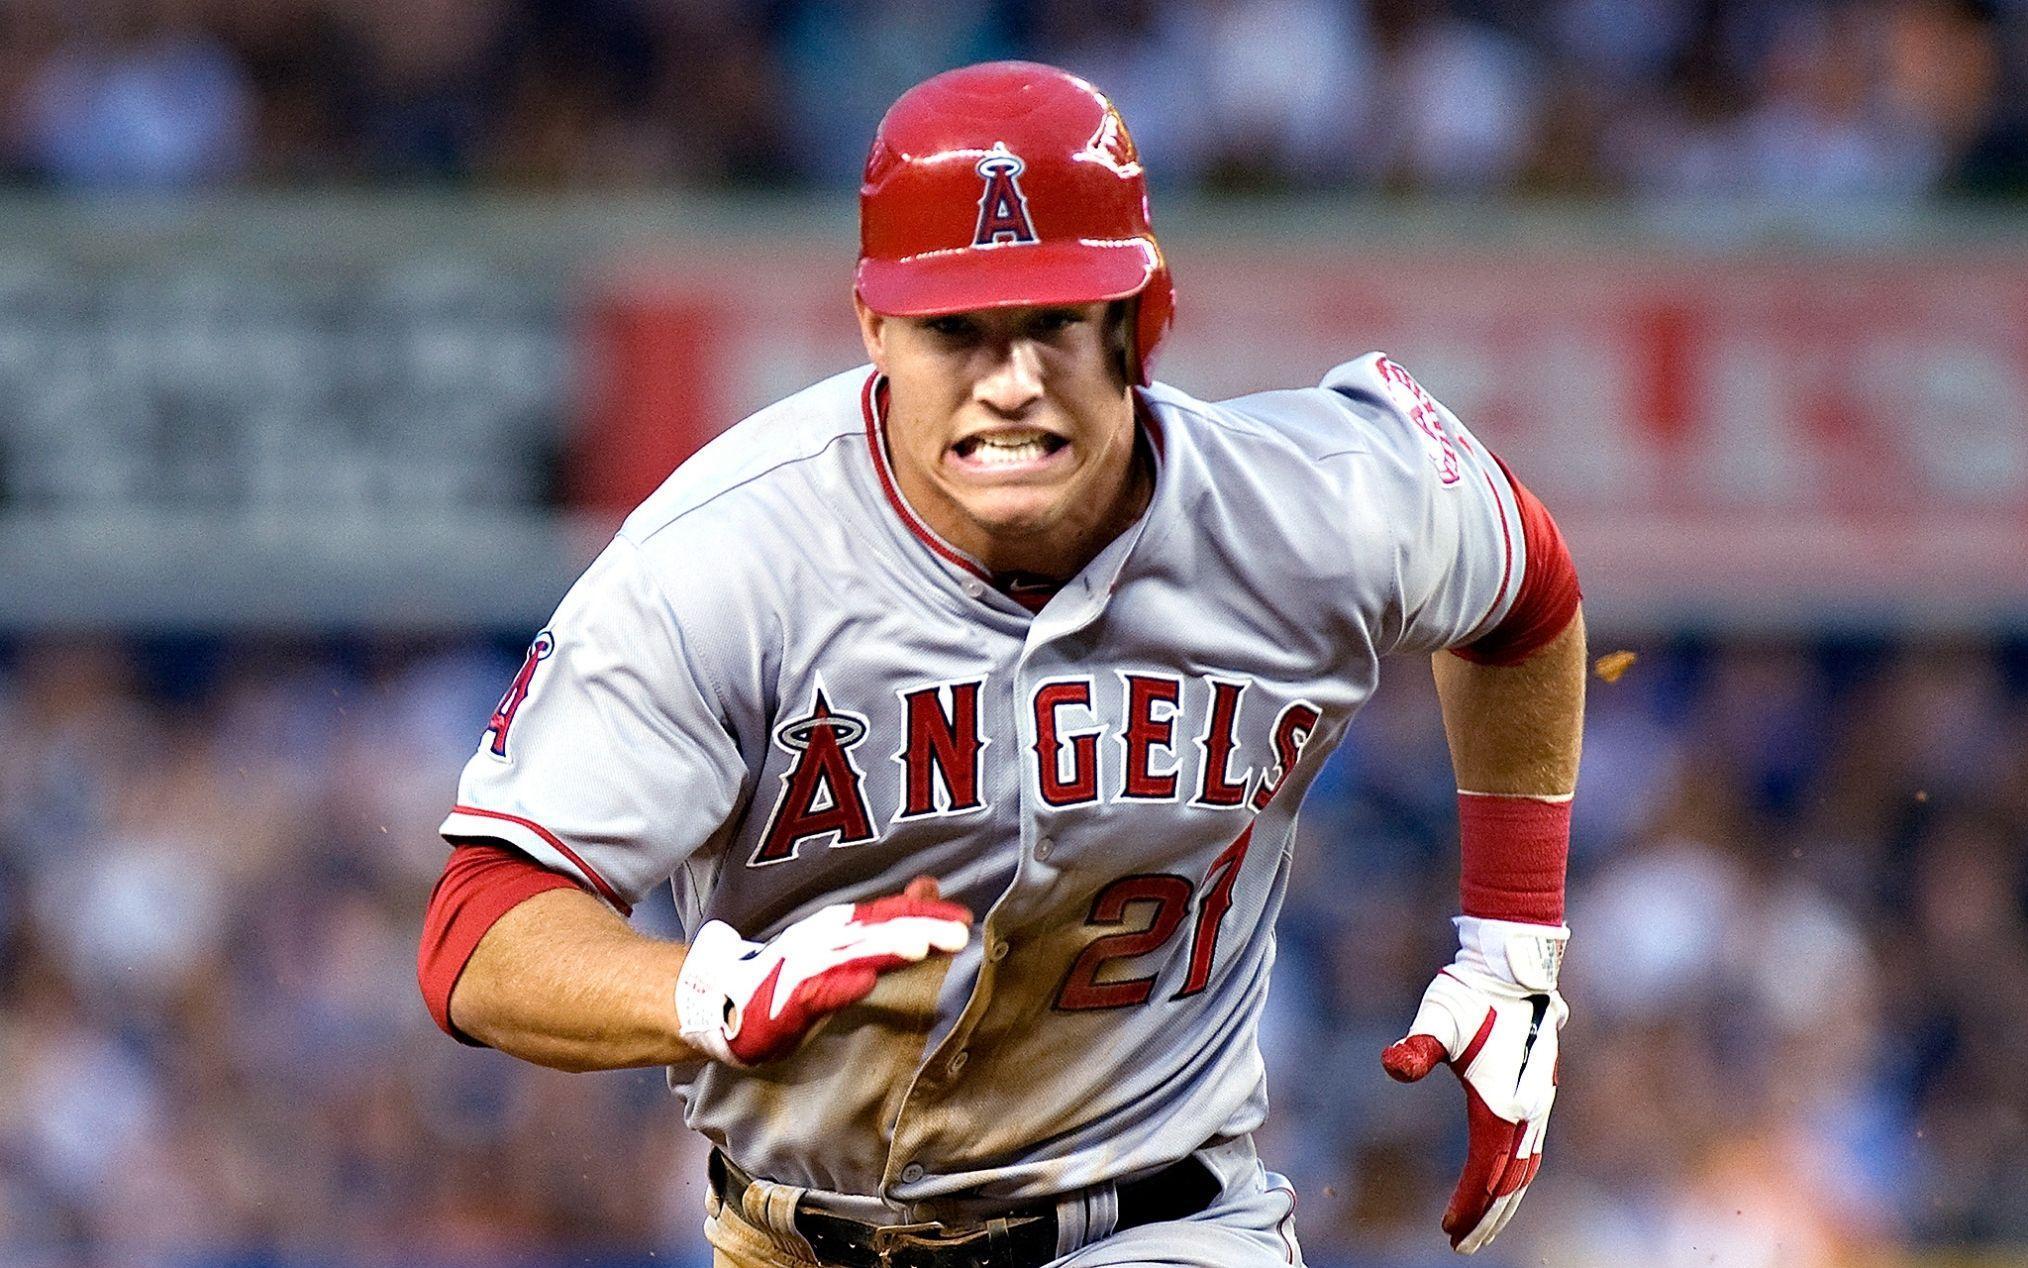 Mike Trout Baseball Player Wallpaper with Mike Trout Wallpaper